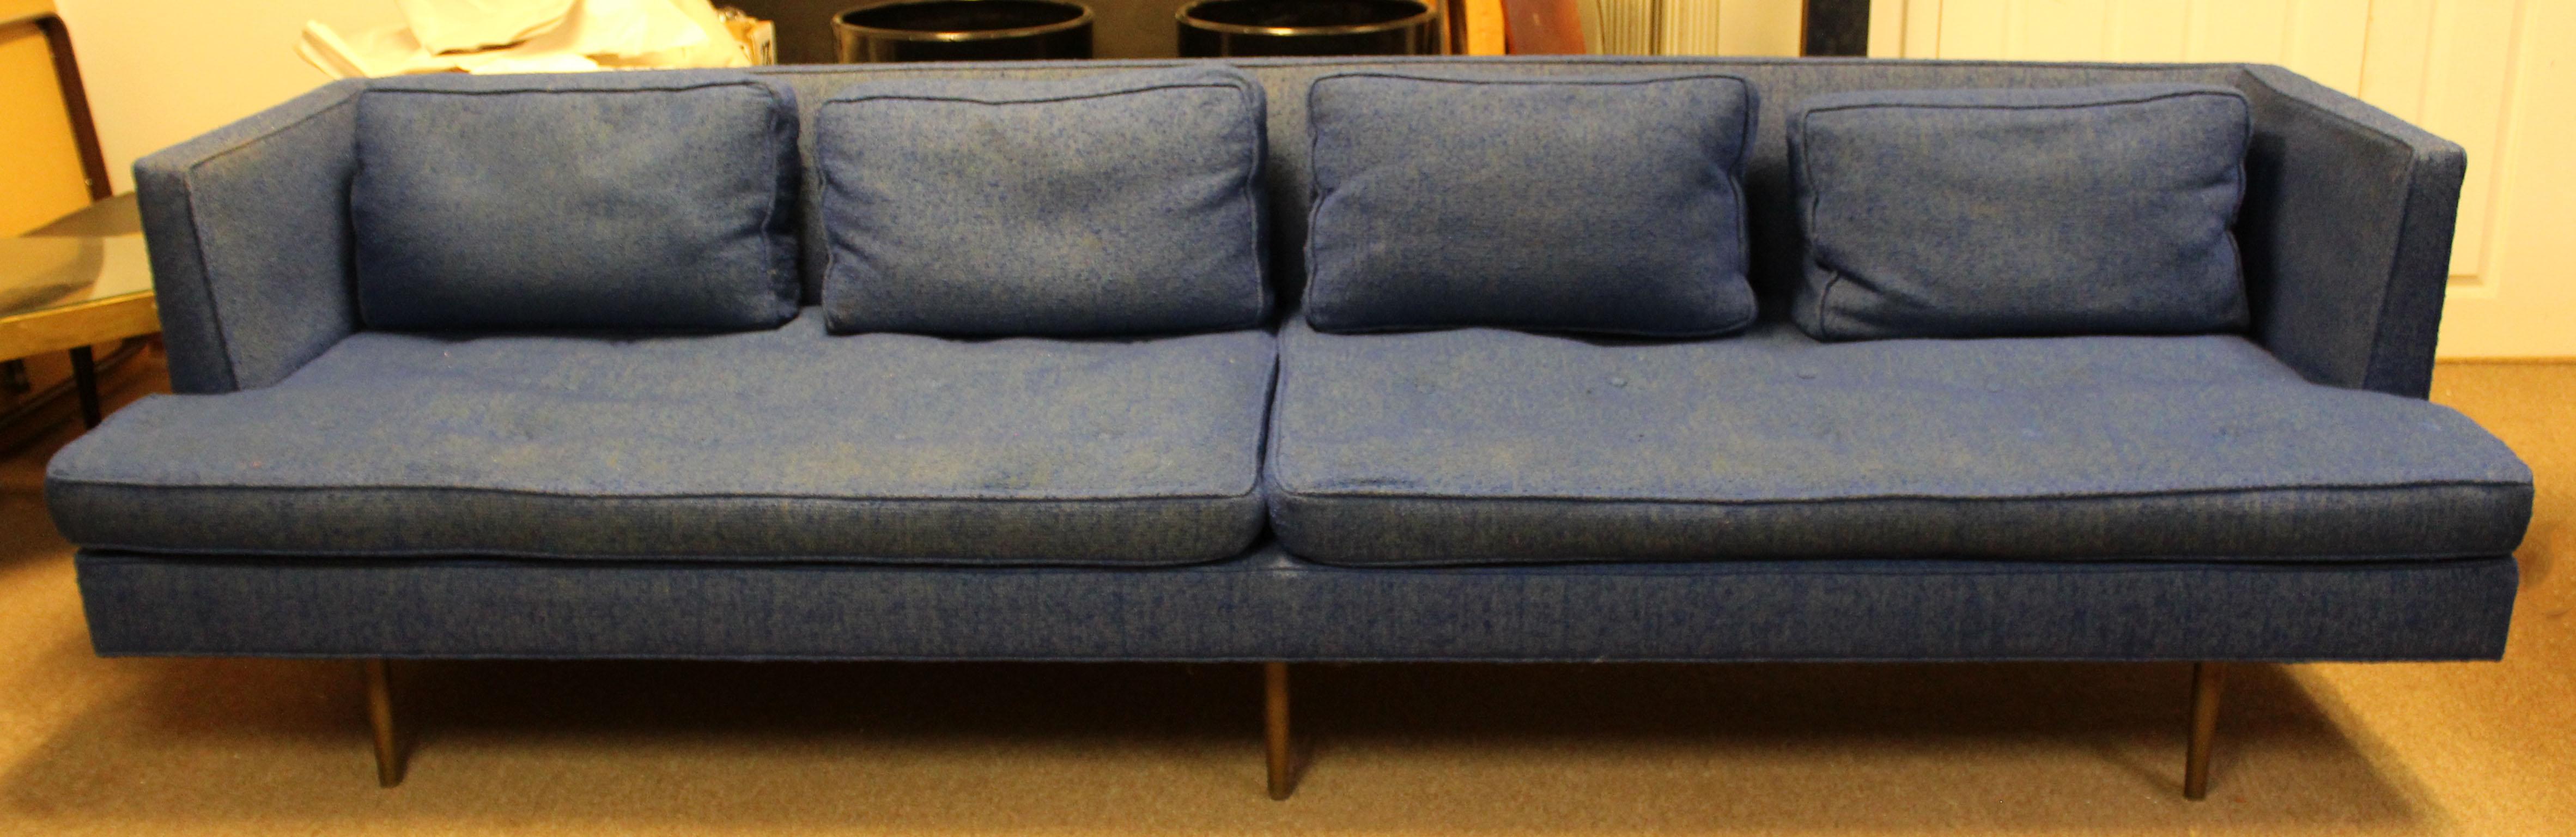 For your consideration is a stunning, indigo blue sofa, with polished brass legs, by Edward Wormley for Dunbar, circa 1950s. Structurally in good condition, however cushions need re-foaming. The dimensions are 108